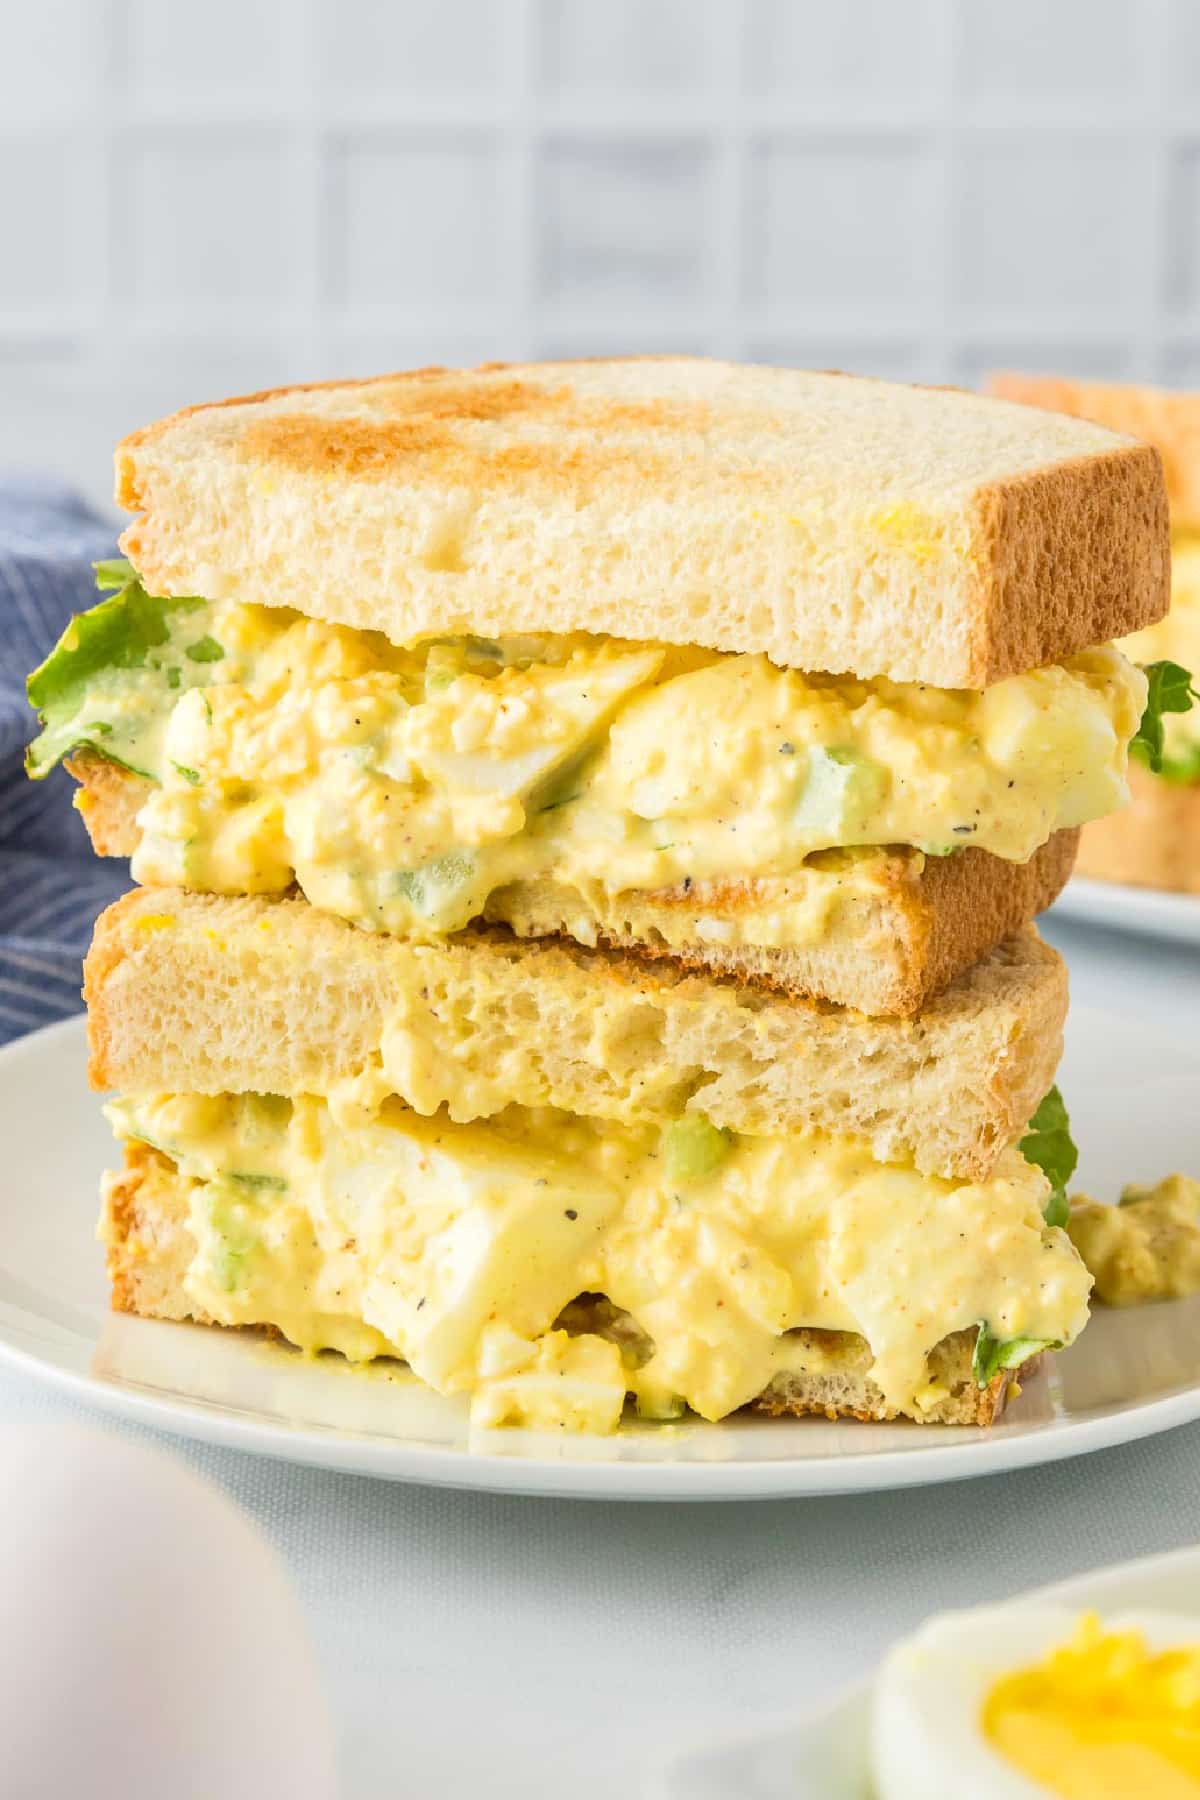 A plate with an egg salad sandwich cut into two pieces stacked on top of each other.